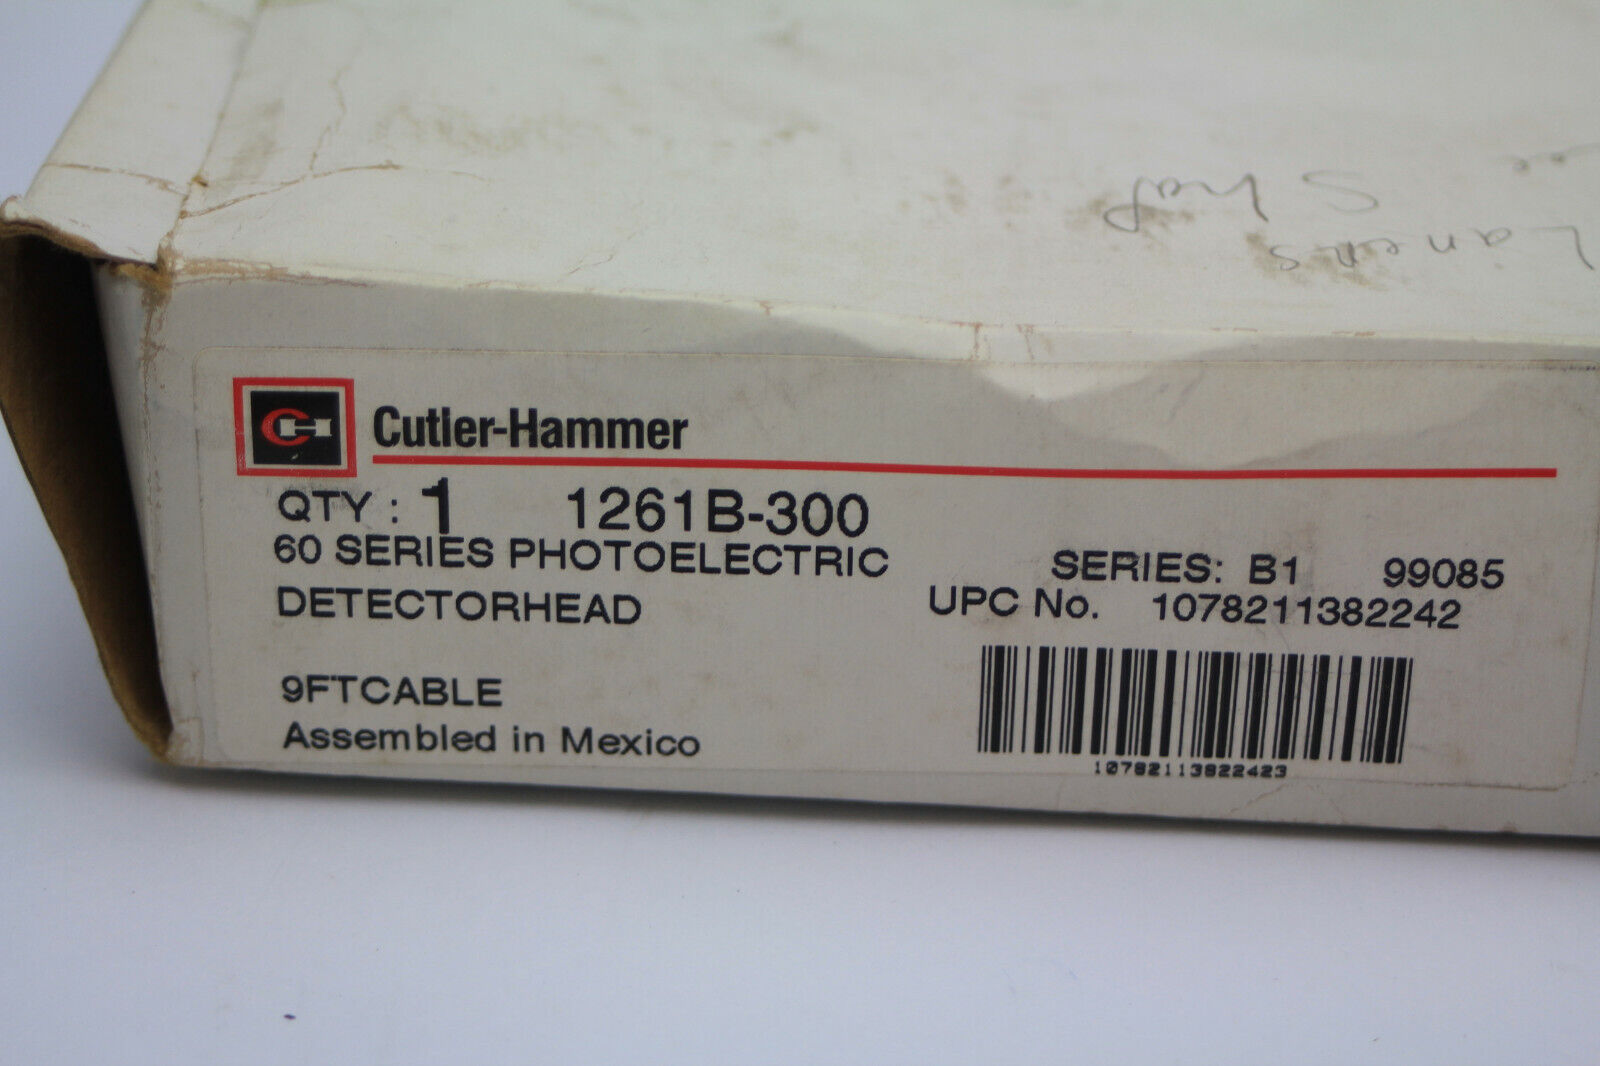 Cutler-Hammer 1261B-300 Component Photoelectric Detector Head 9ft New